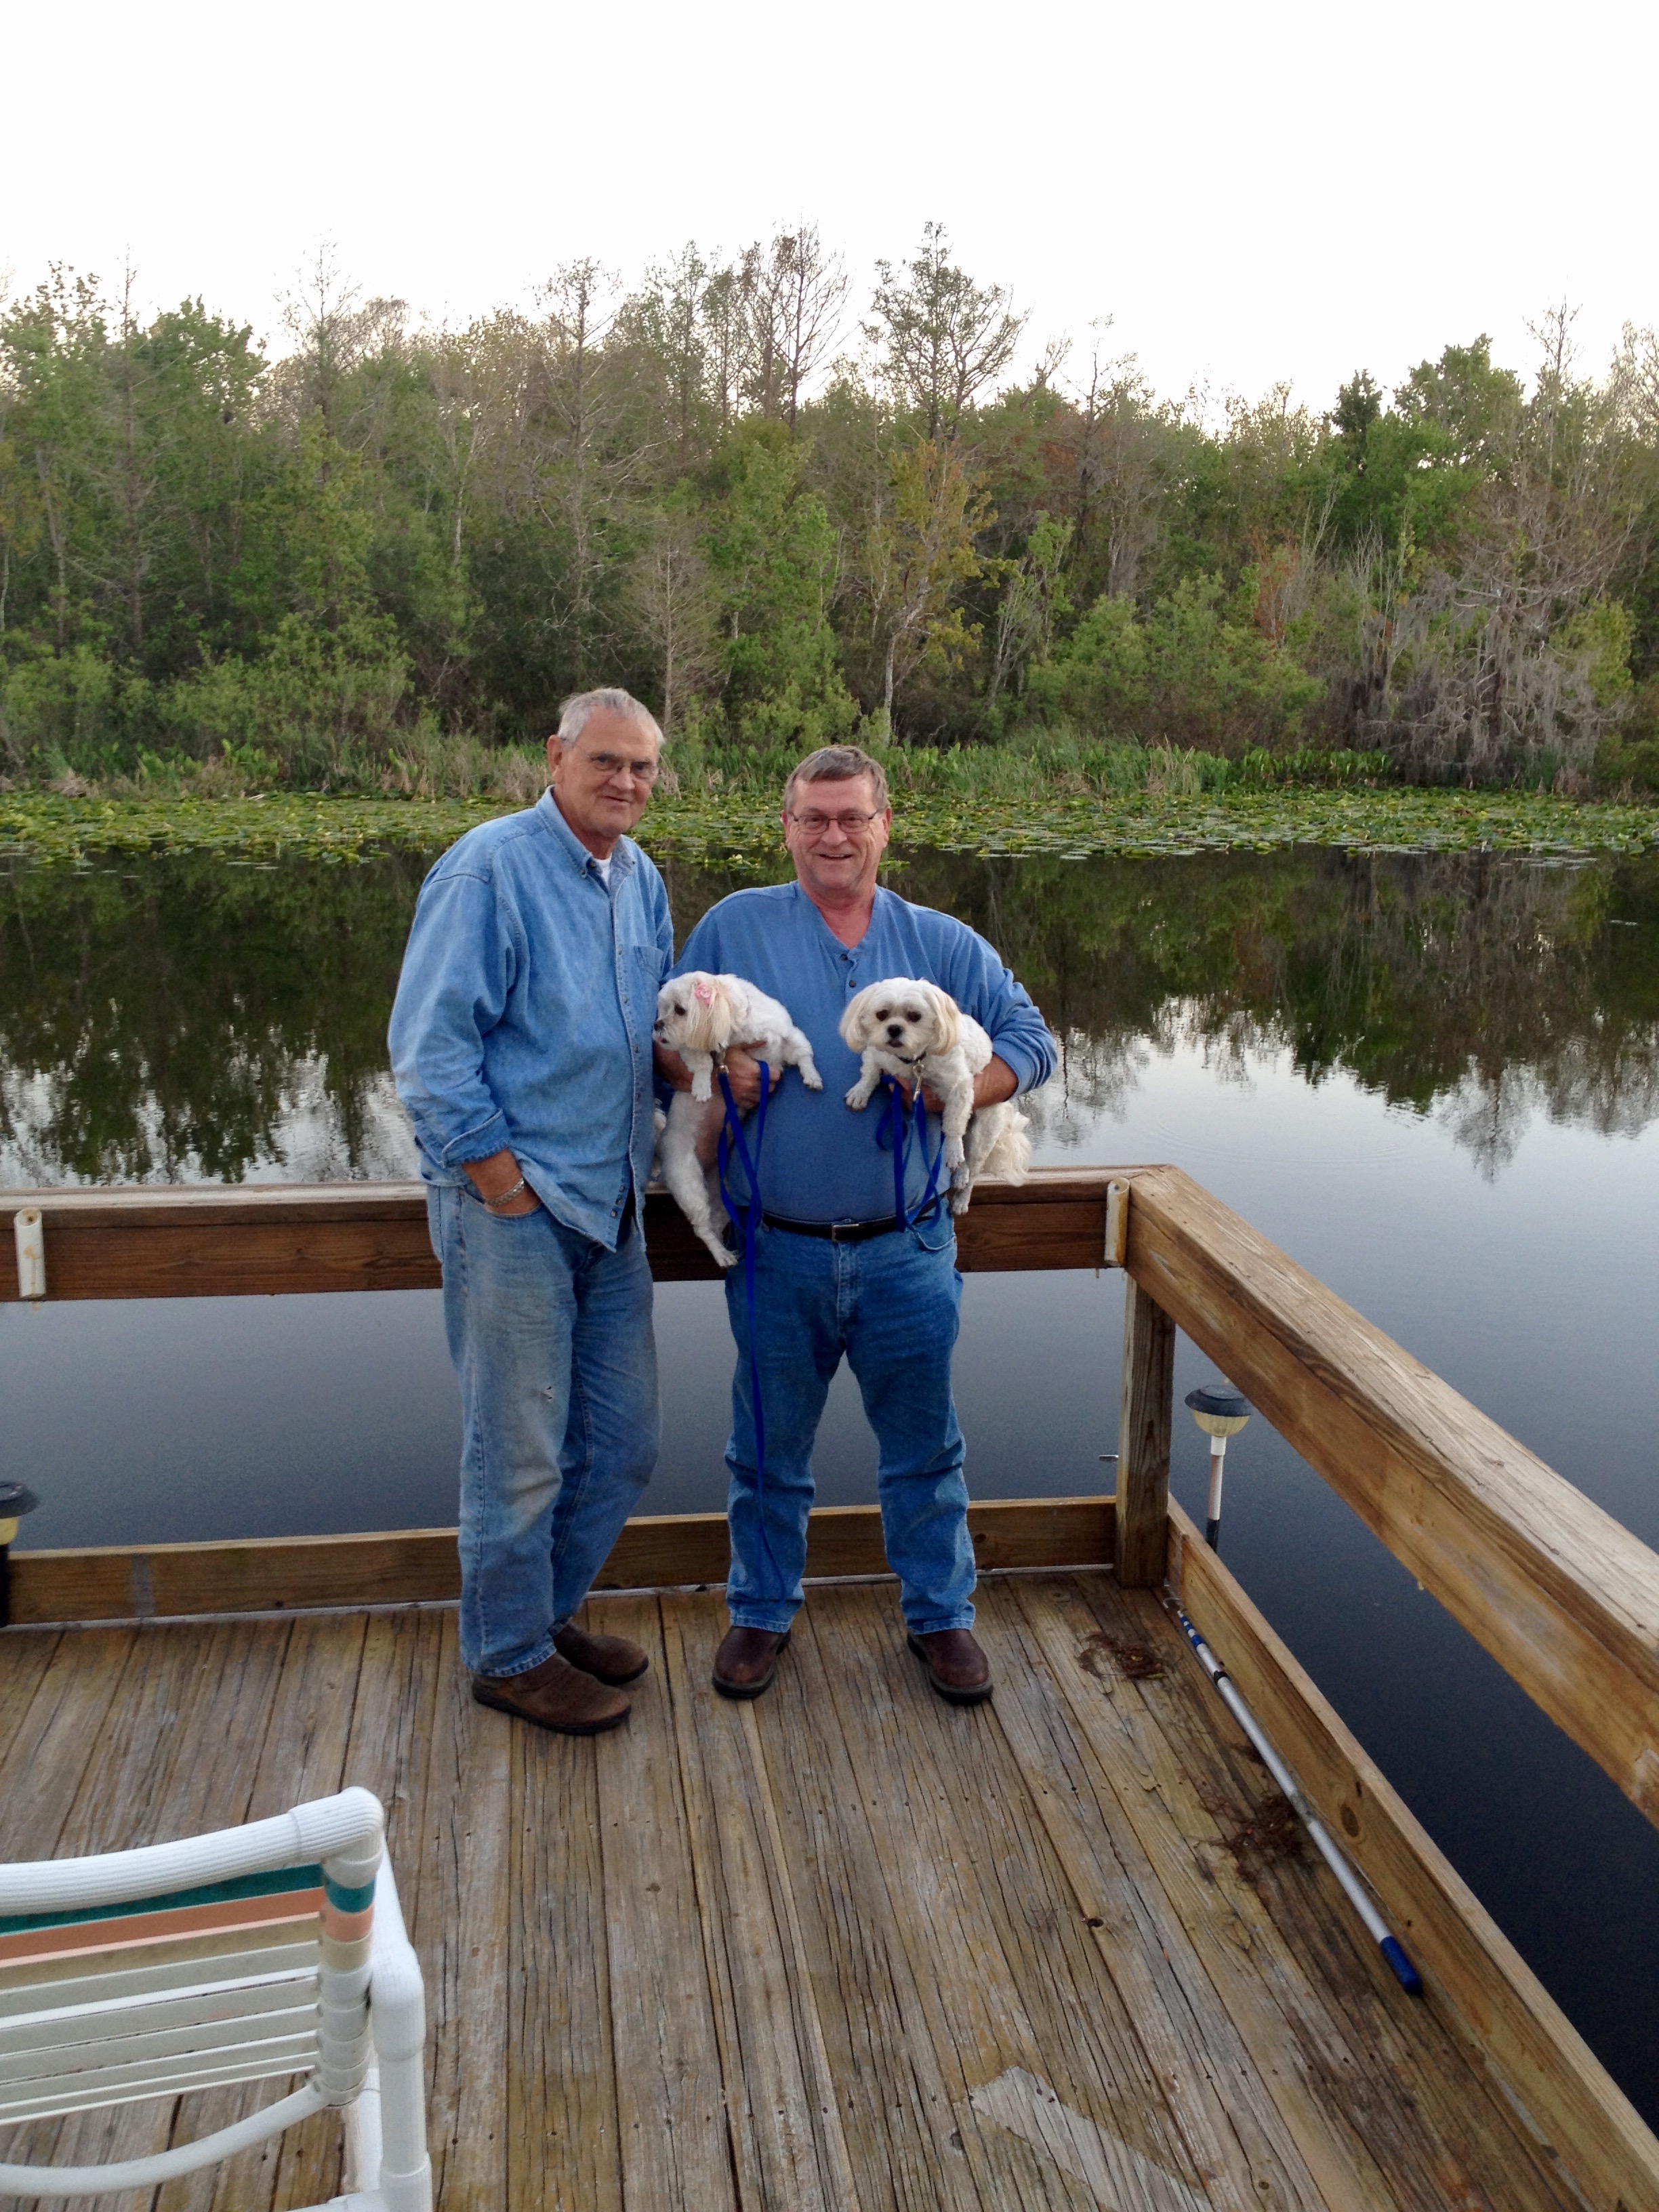 Joe and I enjoyed trying  trying to catch fish  off this dock  while Lori and  Pat watched and laughed at us. We have enjoyed many good times Joe but those times are nothing compared to the times we will have when we meet with next time. We love you buddy.